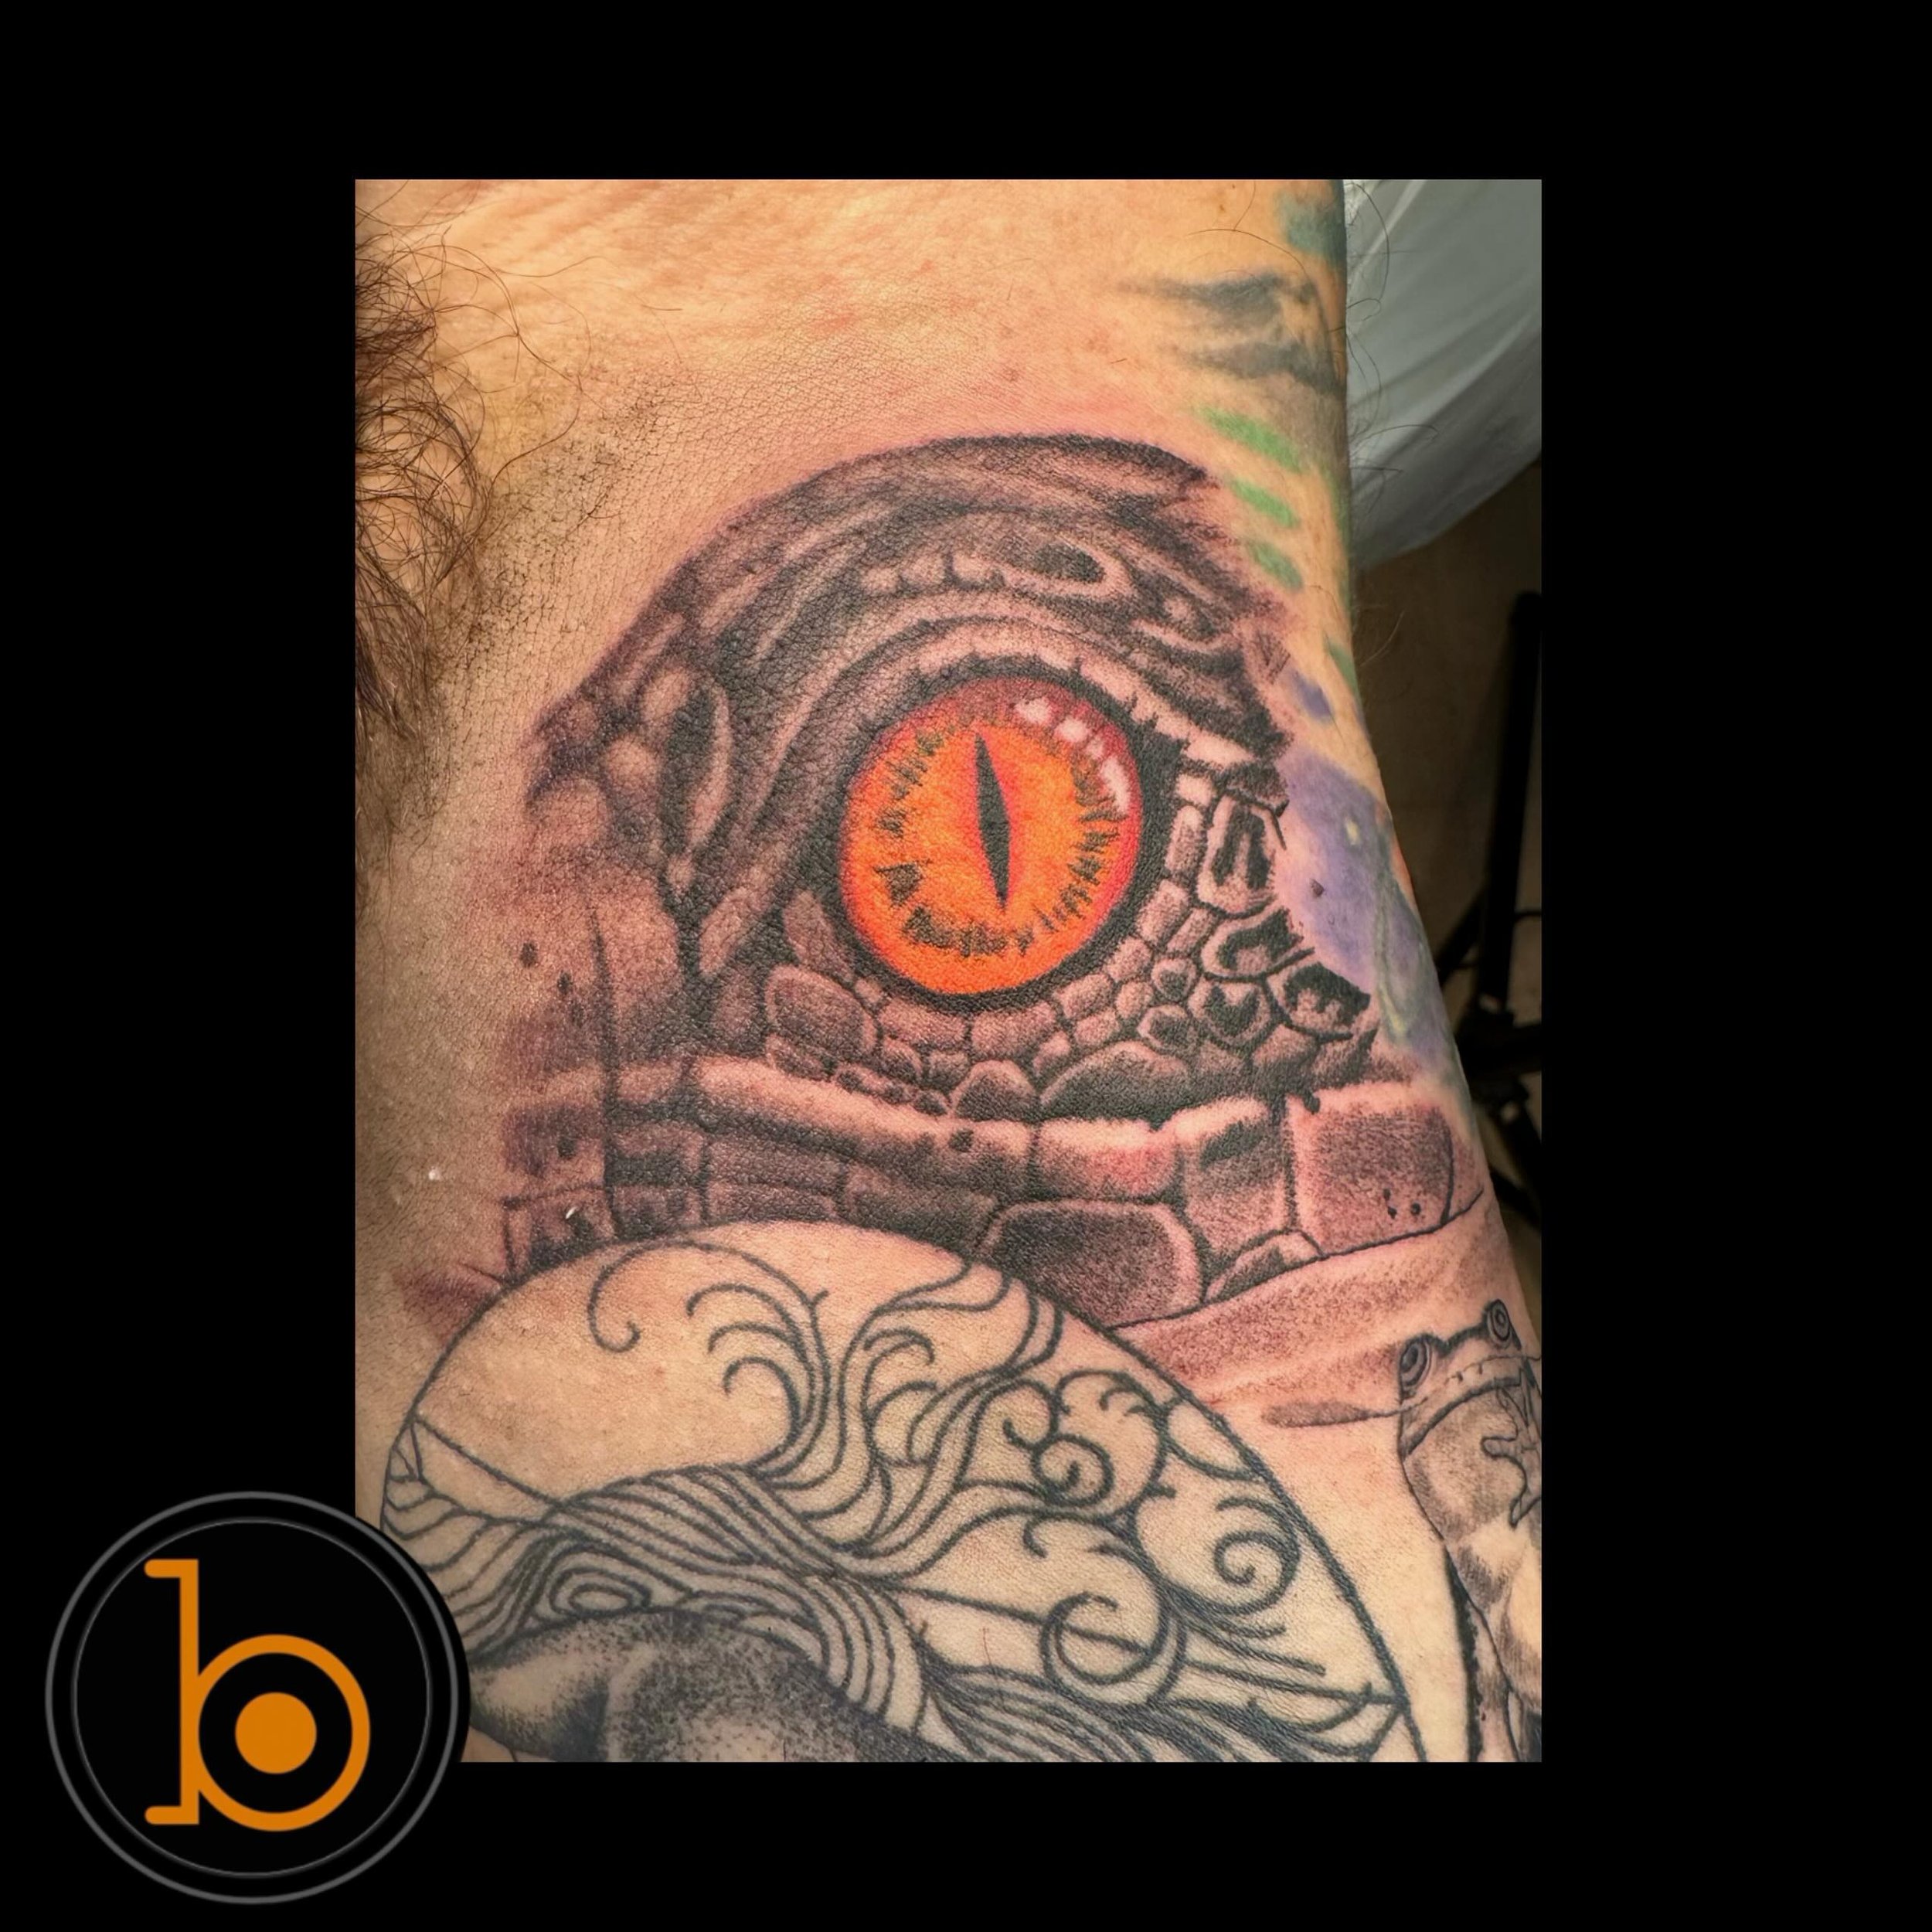 Eye spy a super cool tattoo by resident artist @vct.tattoos 👀
Is this the cheesiest caption I&rsquo;ve ever written? Maybe&hellip; 
➖➖➖➖➖➖➖➖➖➖➖➖➖➖➖➖➖
Blueprint Gallery
138 Russell St
 Hadley MA 01035
📱(413)-387-0221 
WALK-INS WELCOME 
🕸️ www.bluep